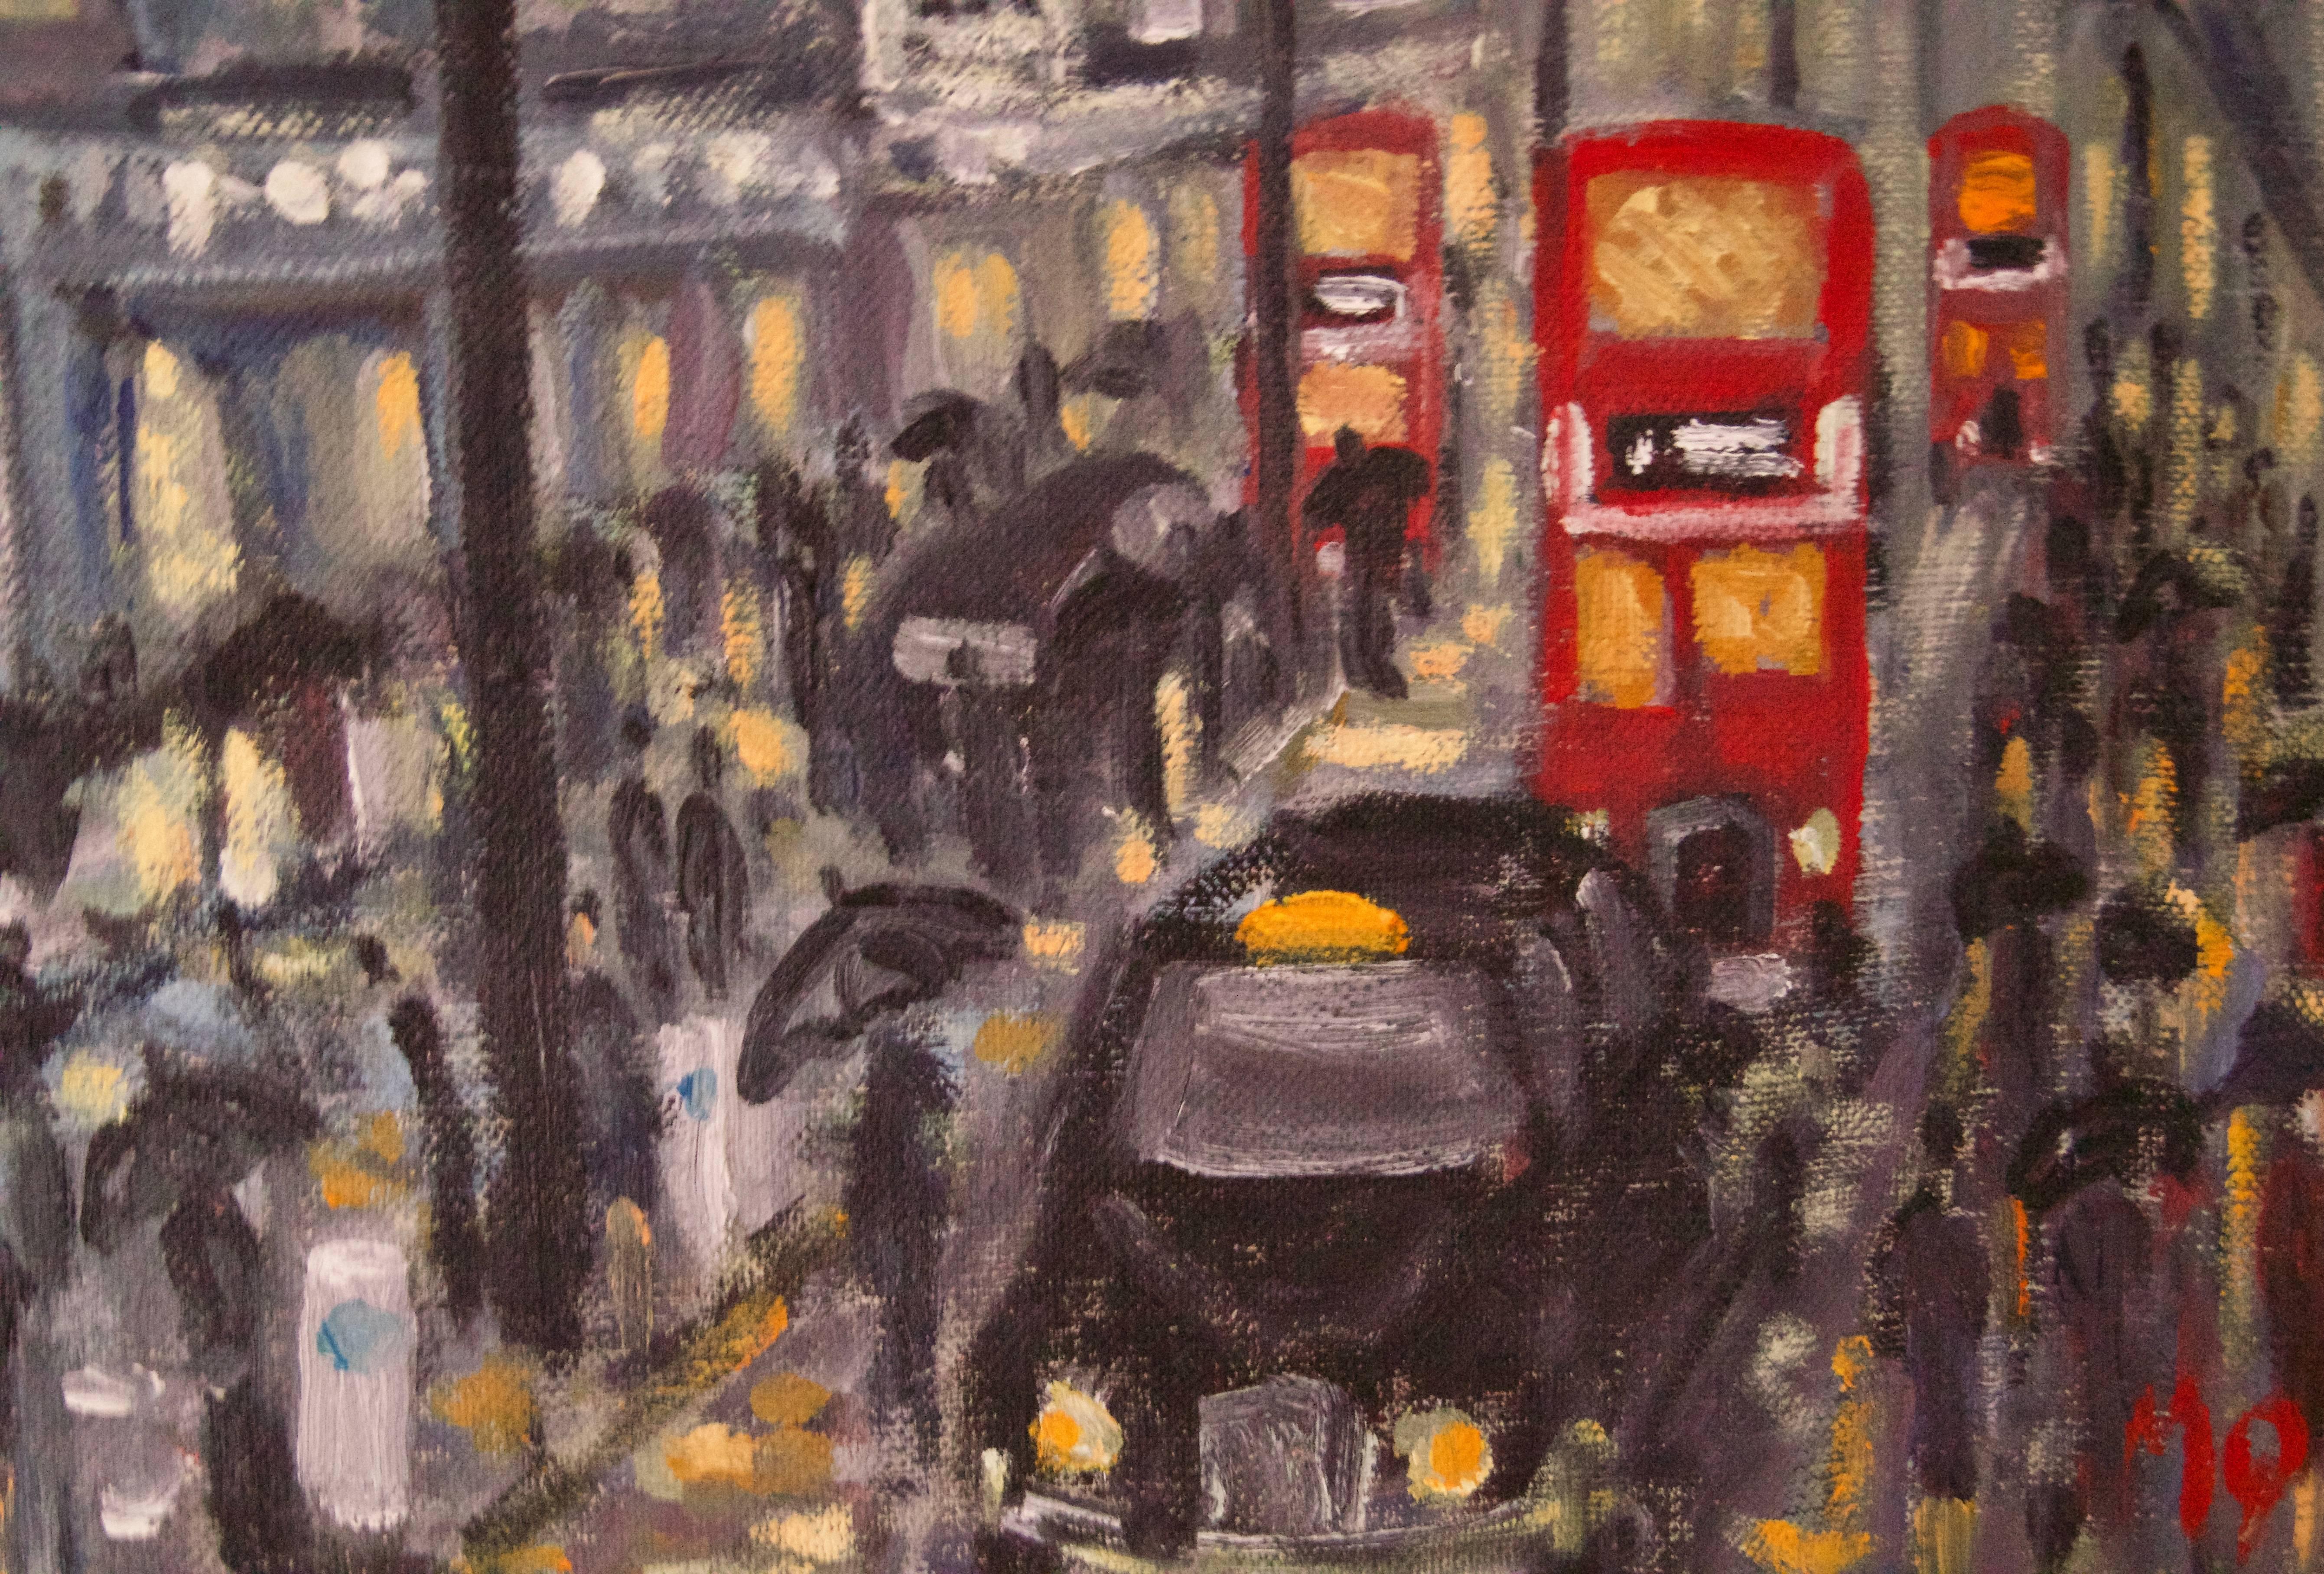 Rainy Night Shopping in London - Late 20th Century Impressionist Piece by Quirke - Post-Impressionist Painting by Michael Quirke